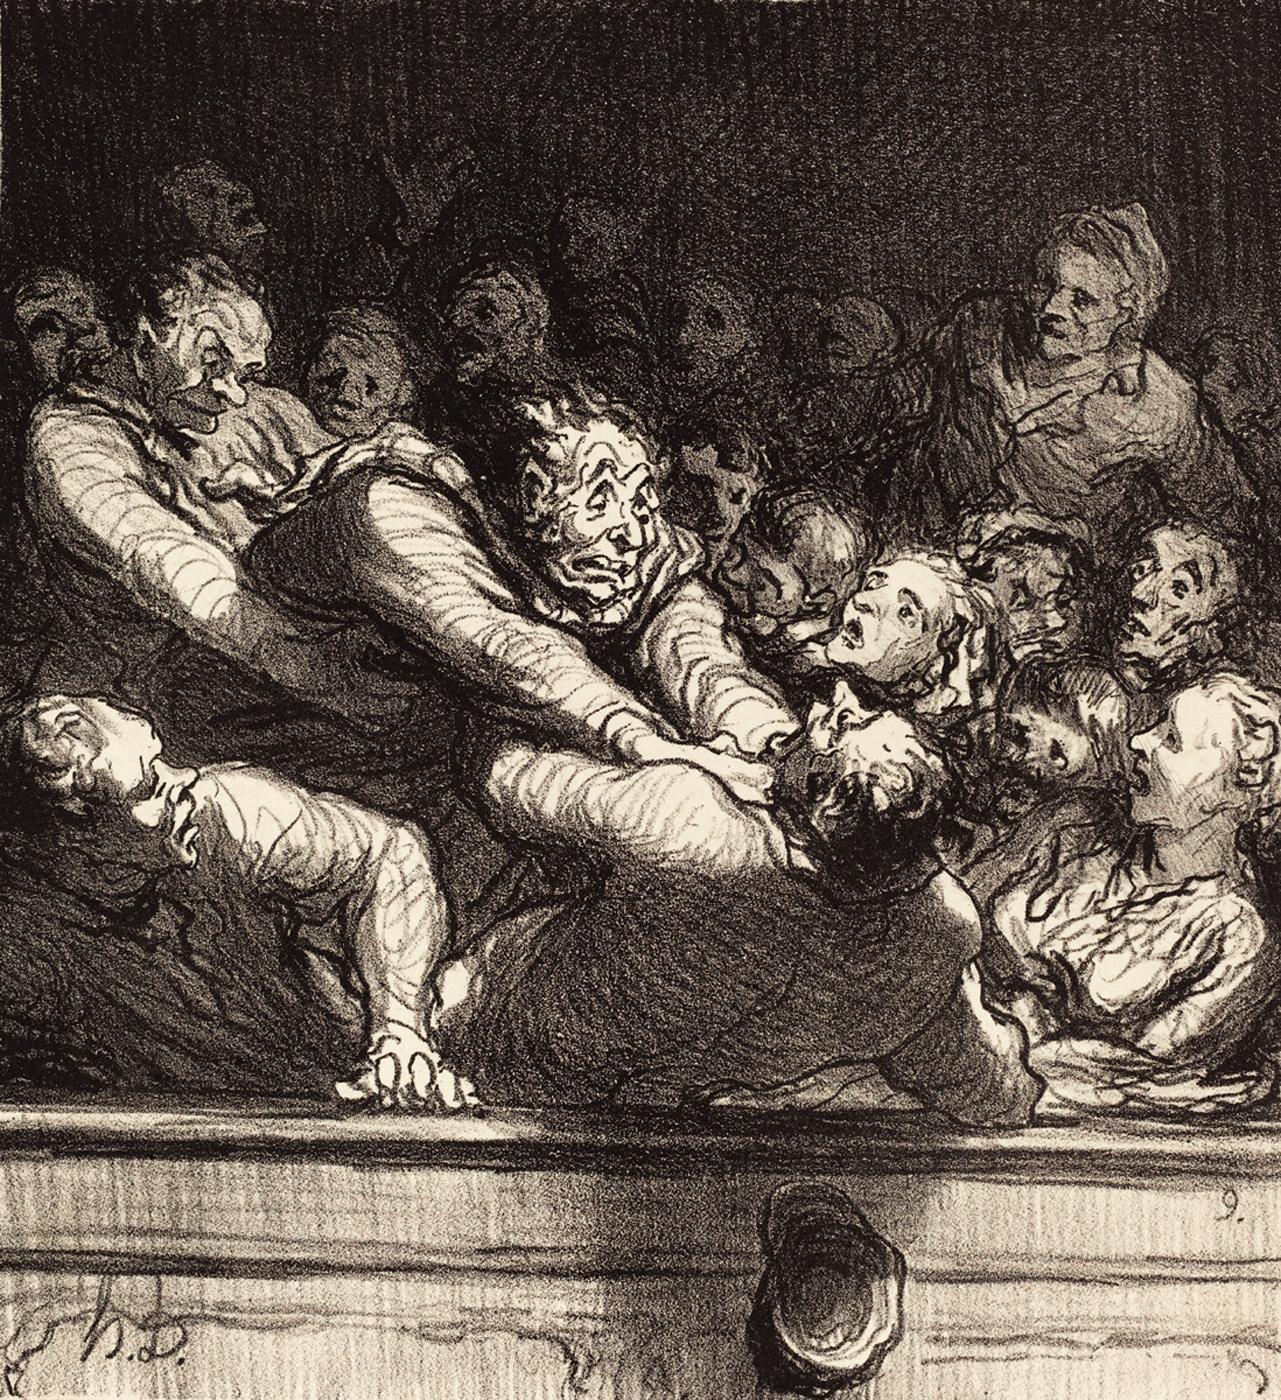 Honoré Daumier A Literary Discussion In The Second Gallery Published In Le Charivari 1864 Lithograph